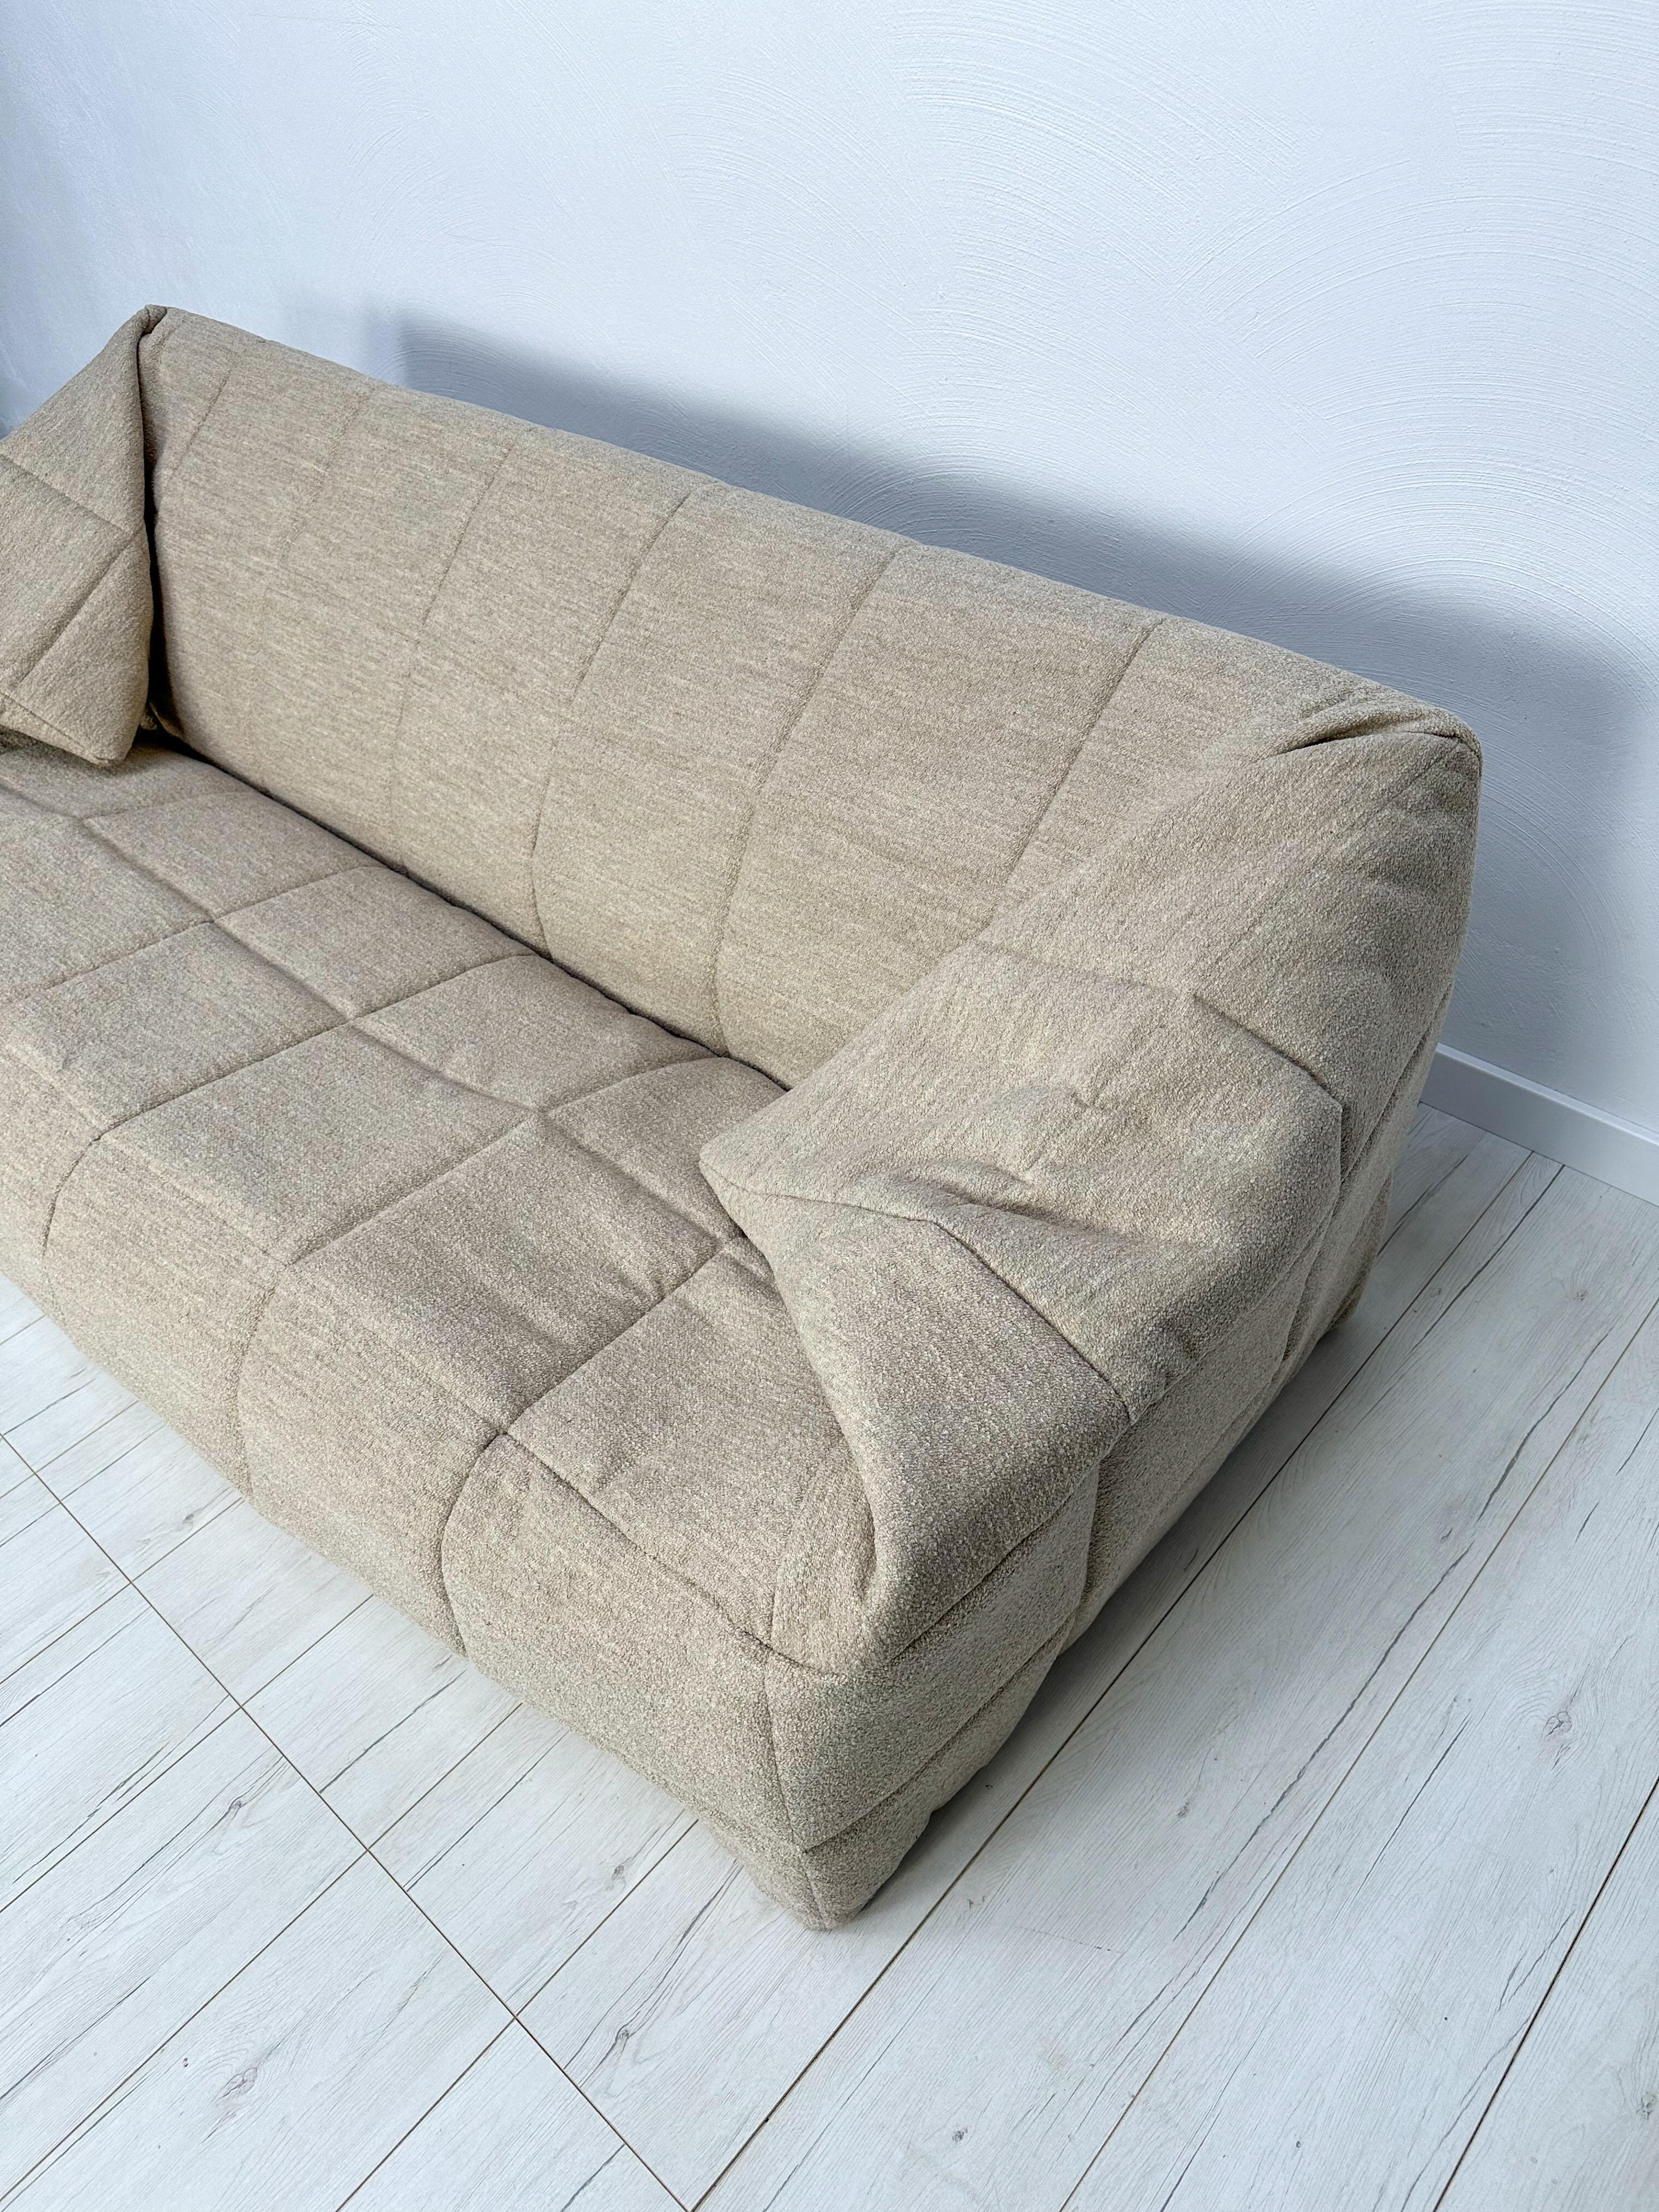 Fabric ORIGINAL 3-SEATER SOFA YUCCA BY MICHEL DUCAROY FOR CINNA, 1980s For Sale